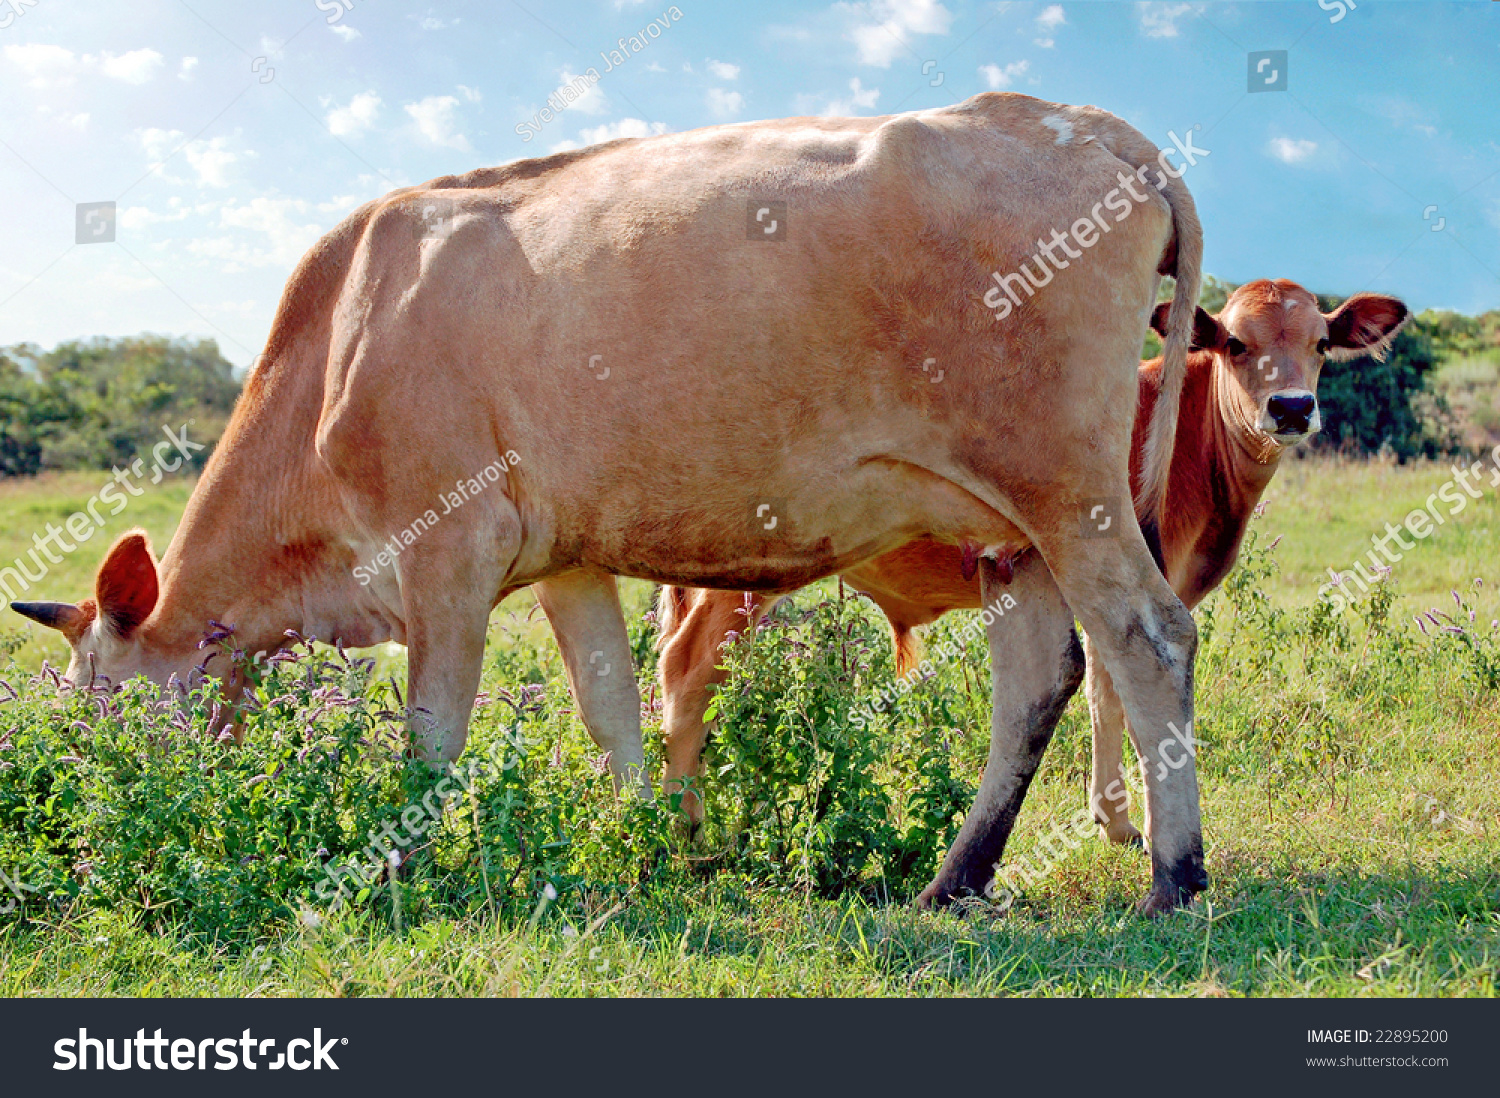 Calf Looks Out Behind Caw Stock Photo 22895200 - Shutterstock